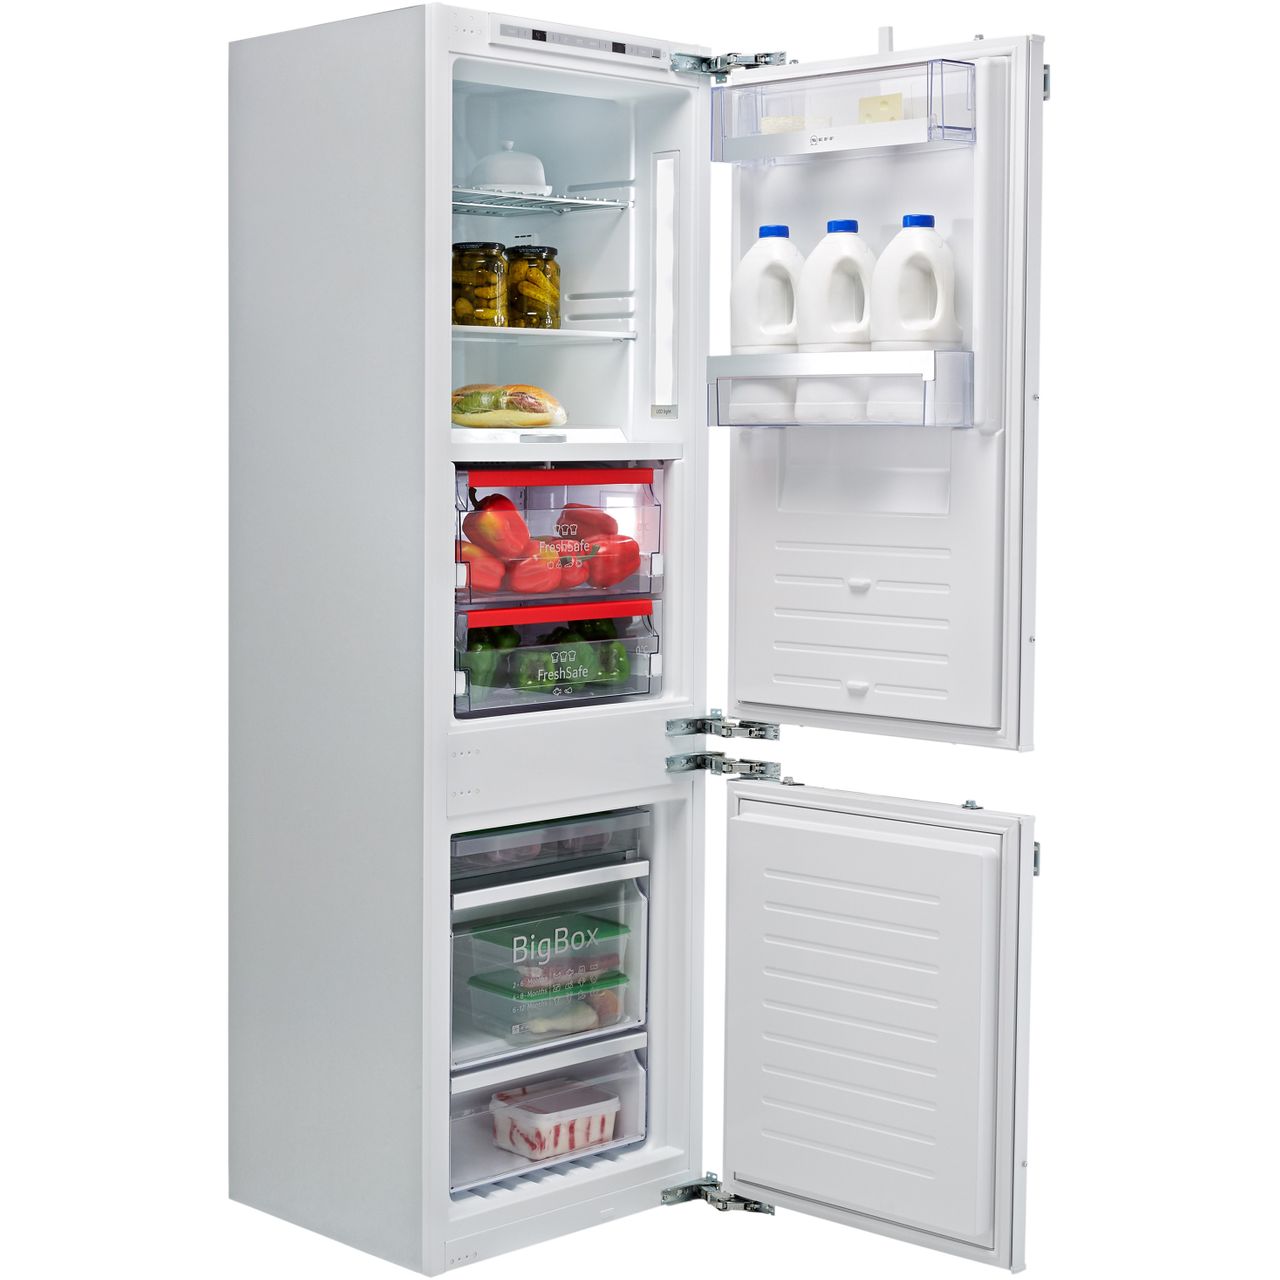 NEFF N90 KI8865D30 Wifi Connected Integrated 60/40 Frost Free Fridge Freezer with Fixed Door Fixing Kit Review